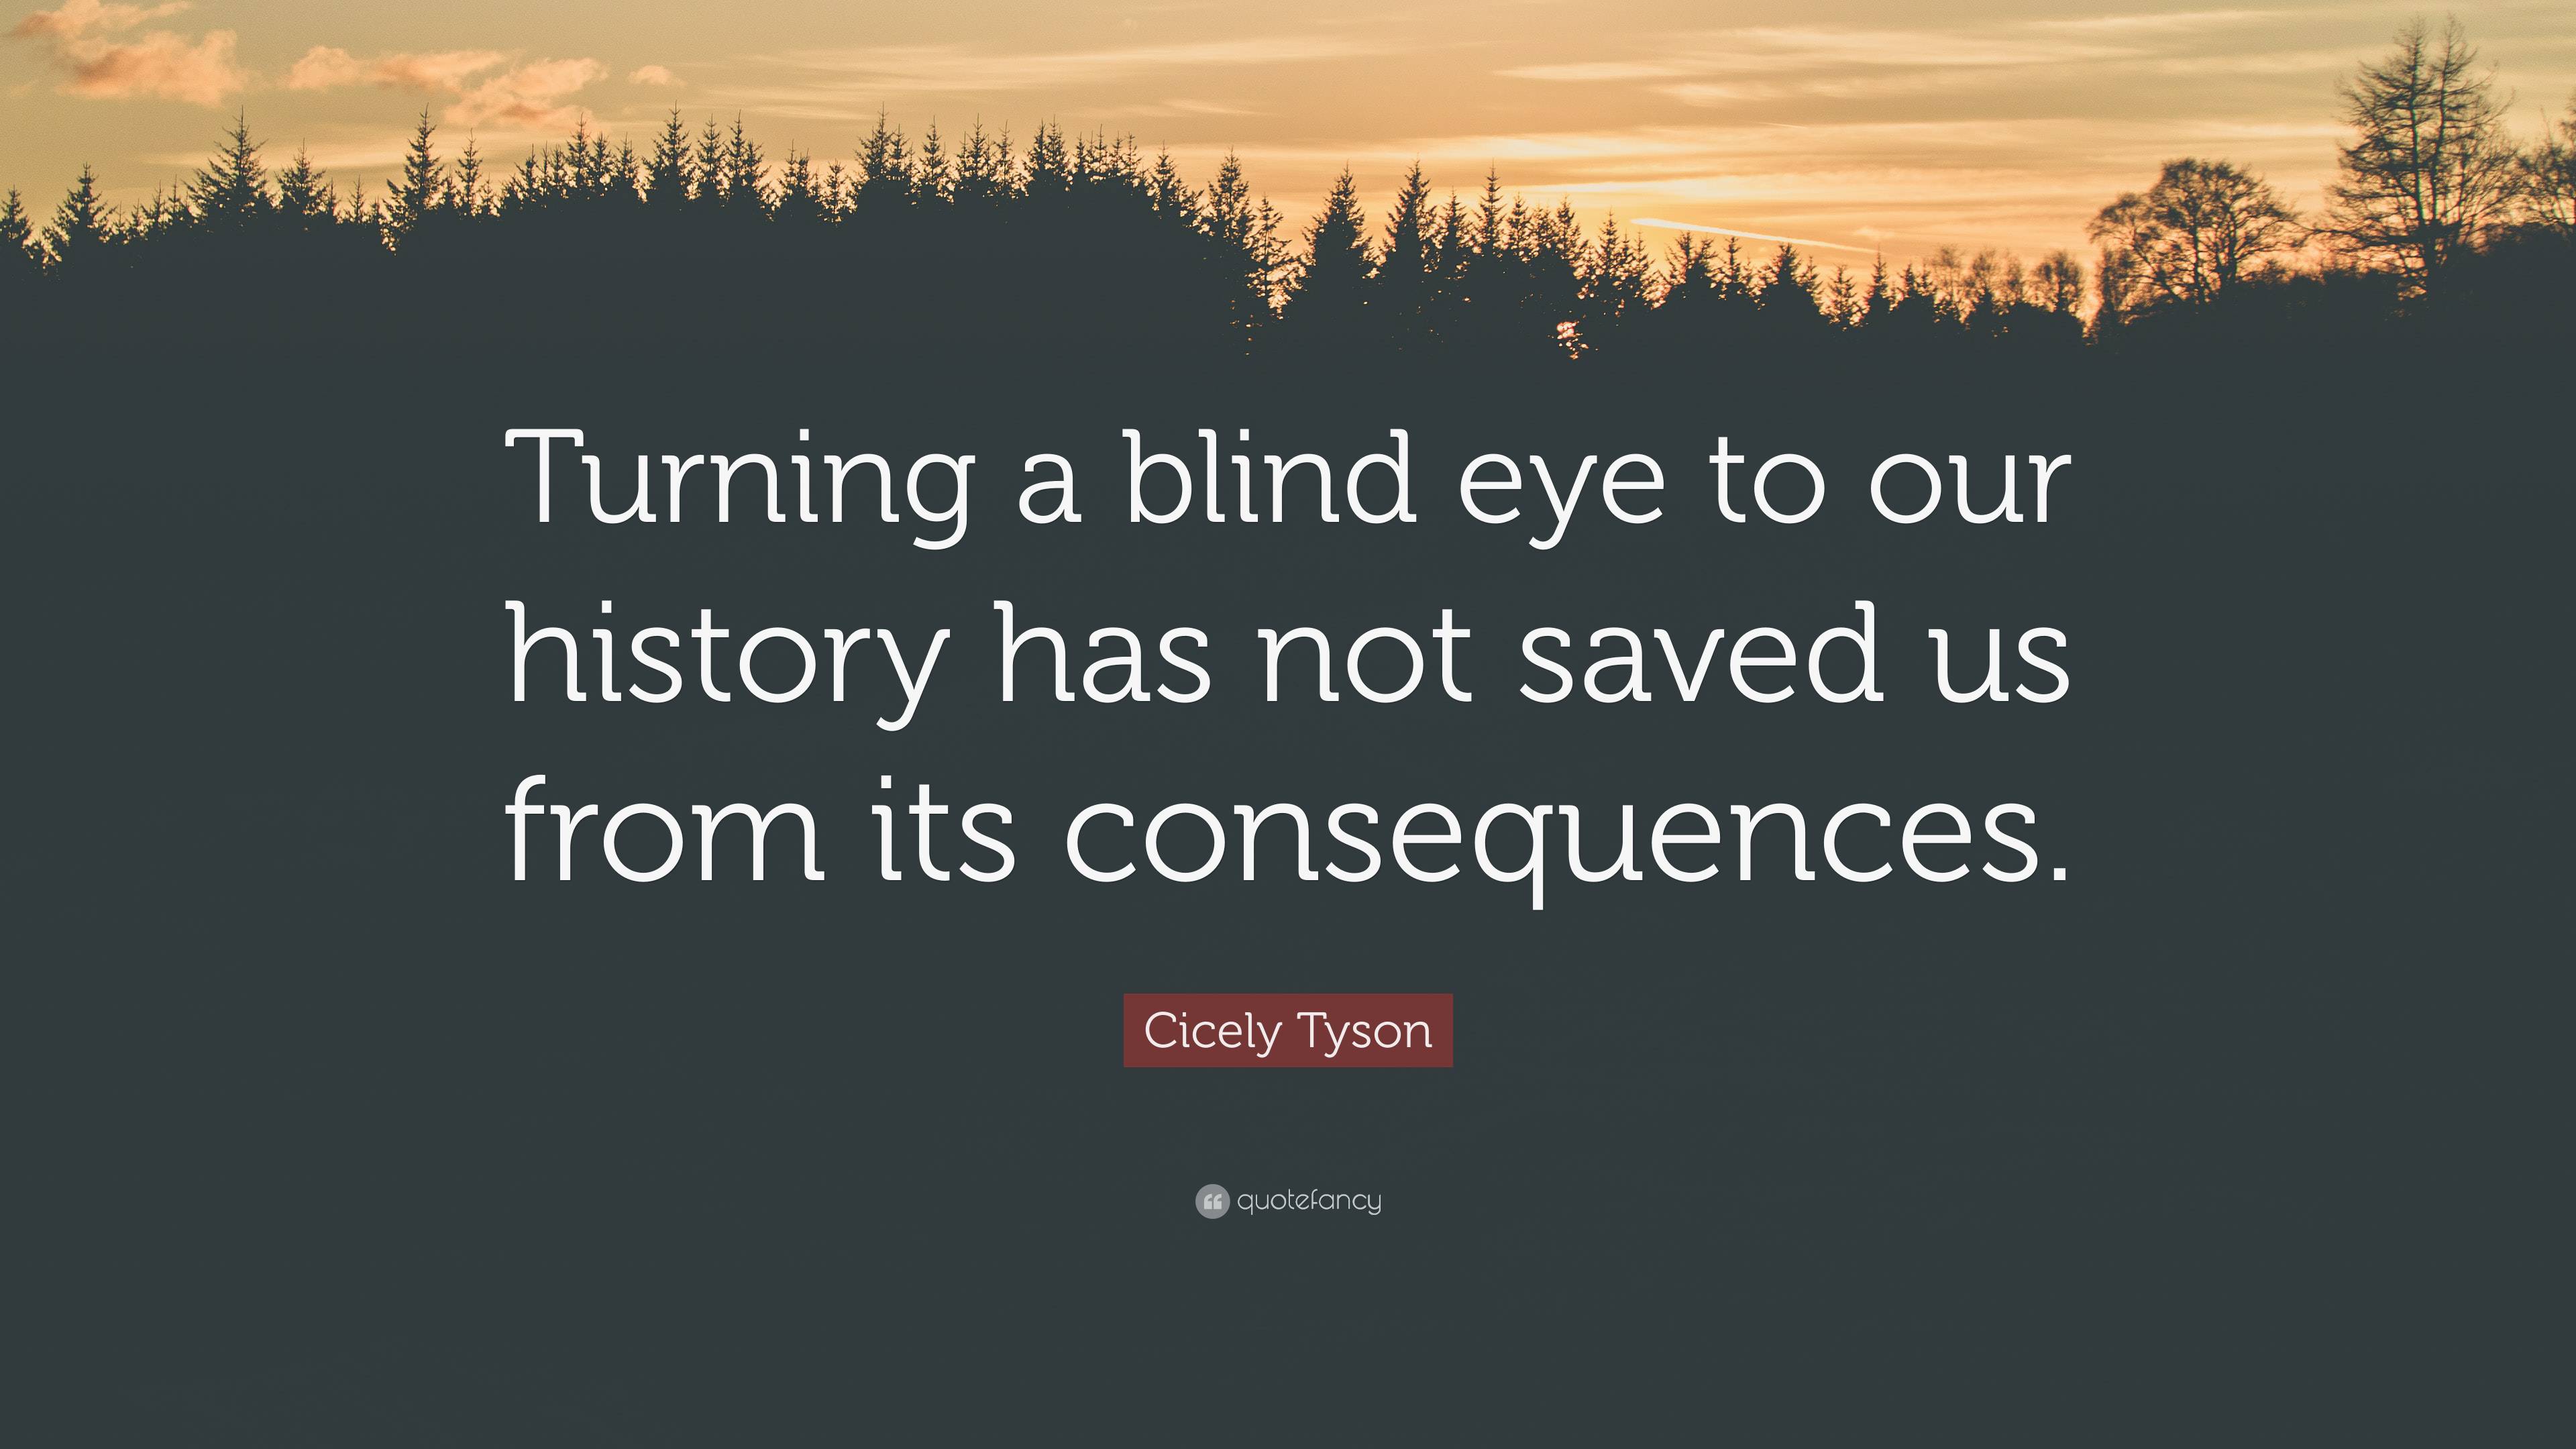 Cicely Tyson Quote “turning A Blind Eye To Our History Has Not Saved Us From Its Consequences” 1668